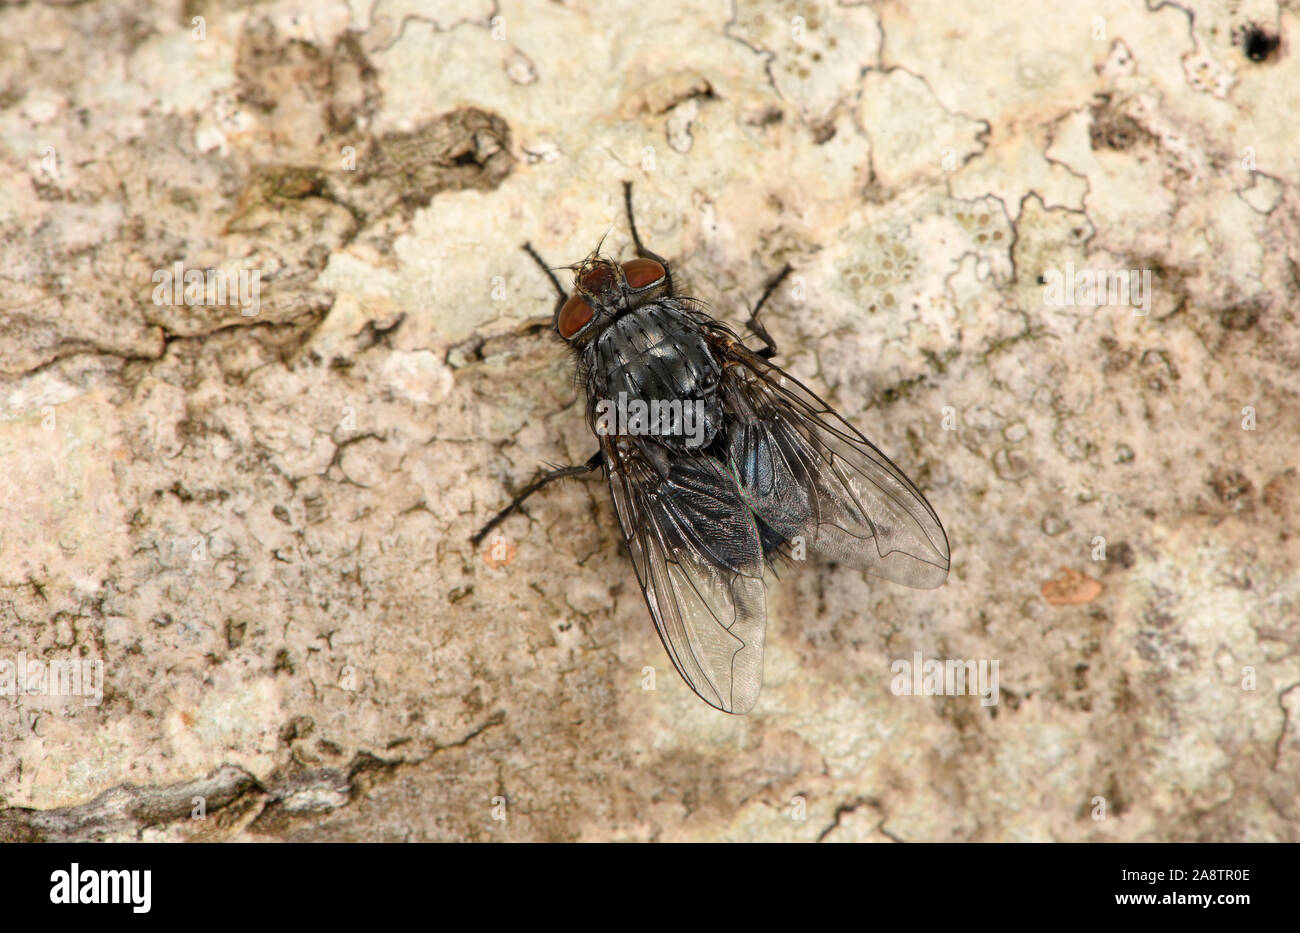 Bluebottle Fly (Calliphora vomitoria) ar rest on tree trunk, Wales, UK, August Stock Photo